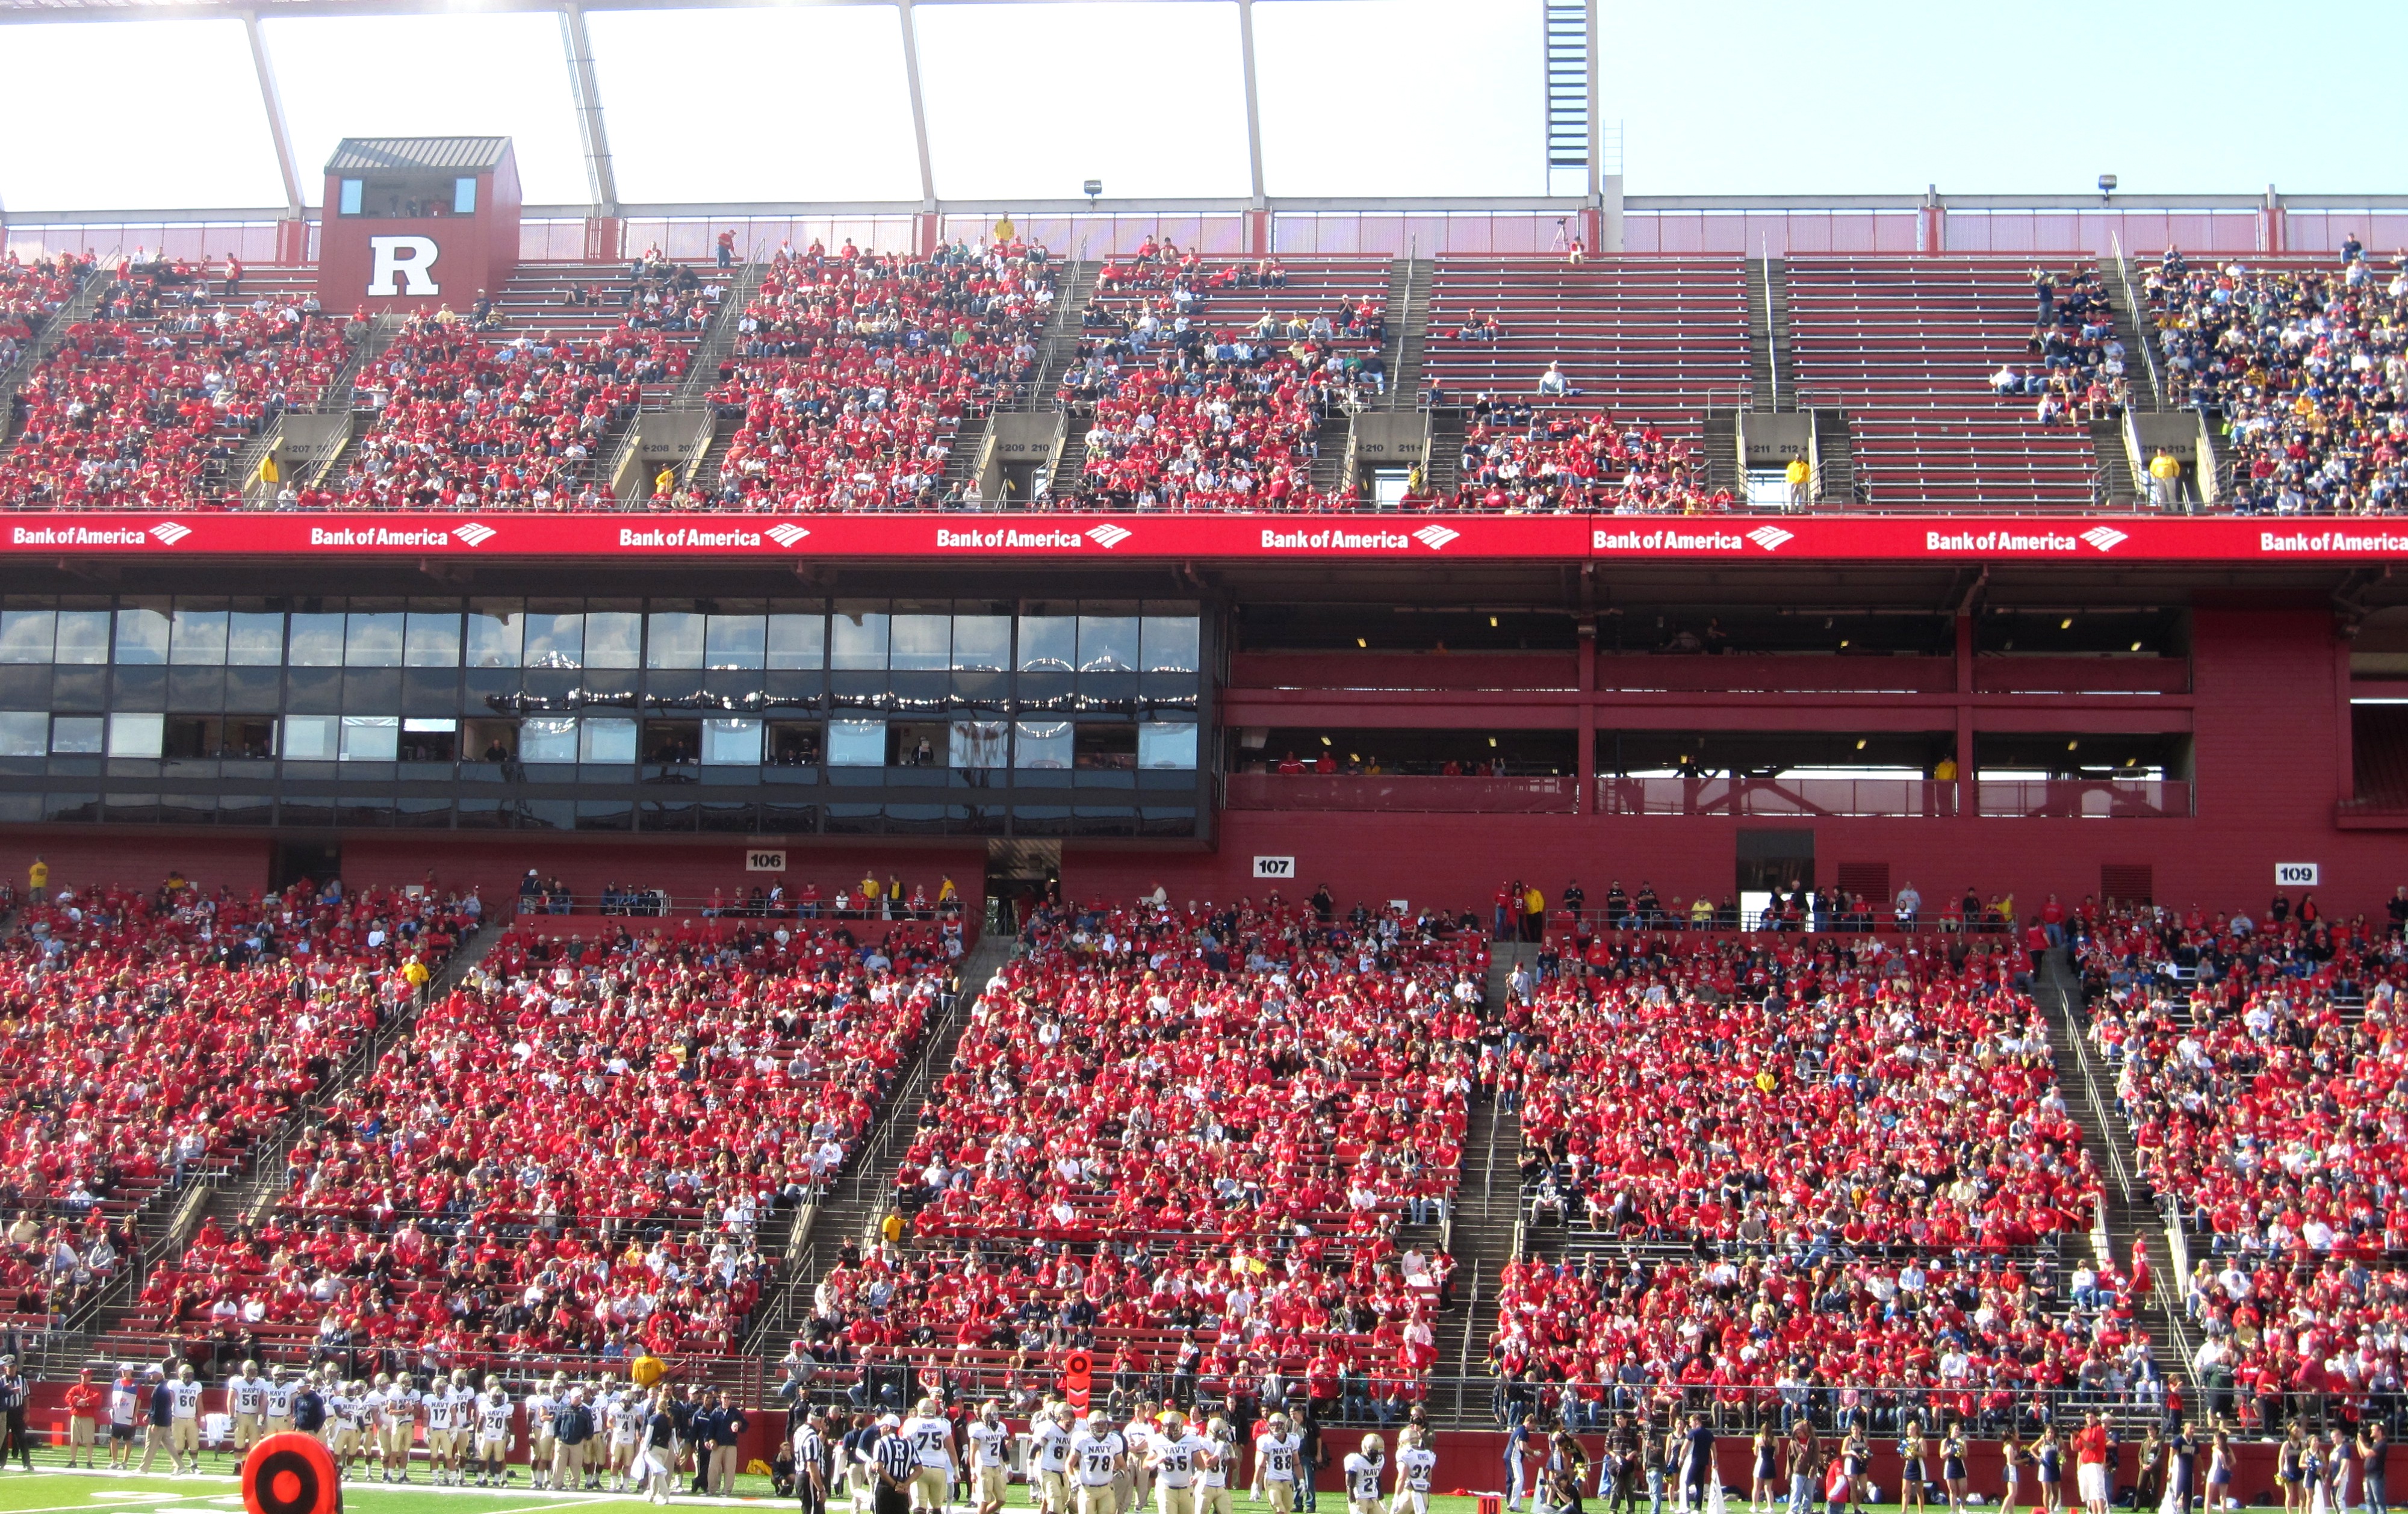 Rutgers Homecoming - RED CHEERS ruled the stadium